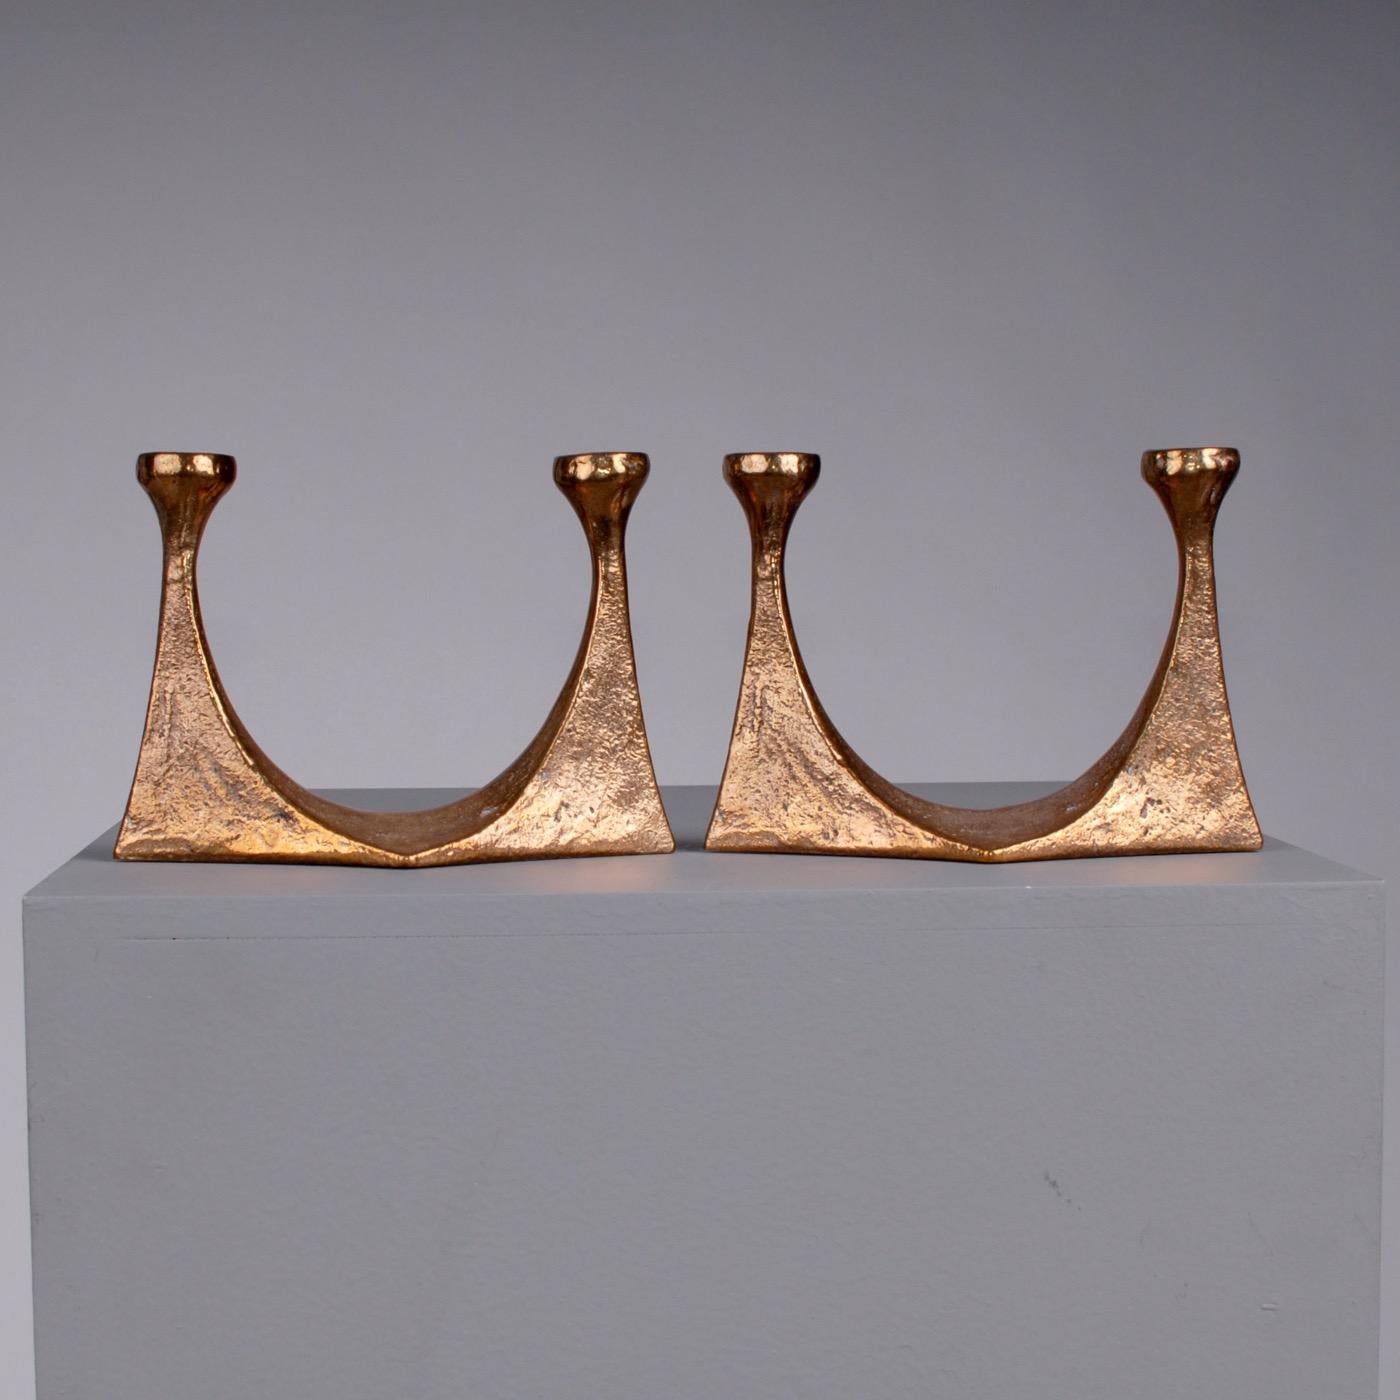 Mid-Century Modern Harjes German massive bell bronze candlesticks. Steady candles holders by Harjes Germany manufactured in the 1970s, model out of production.